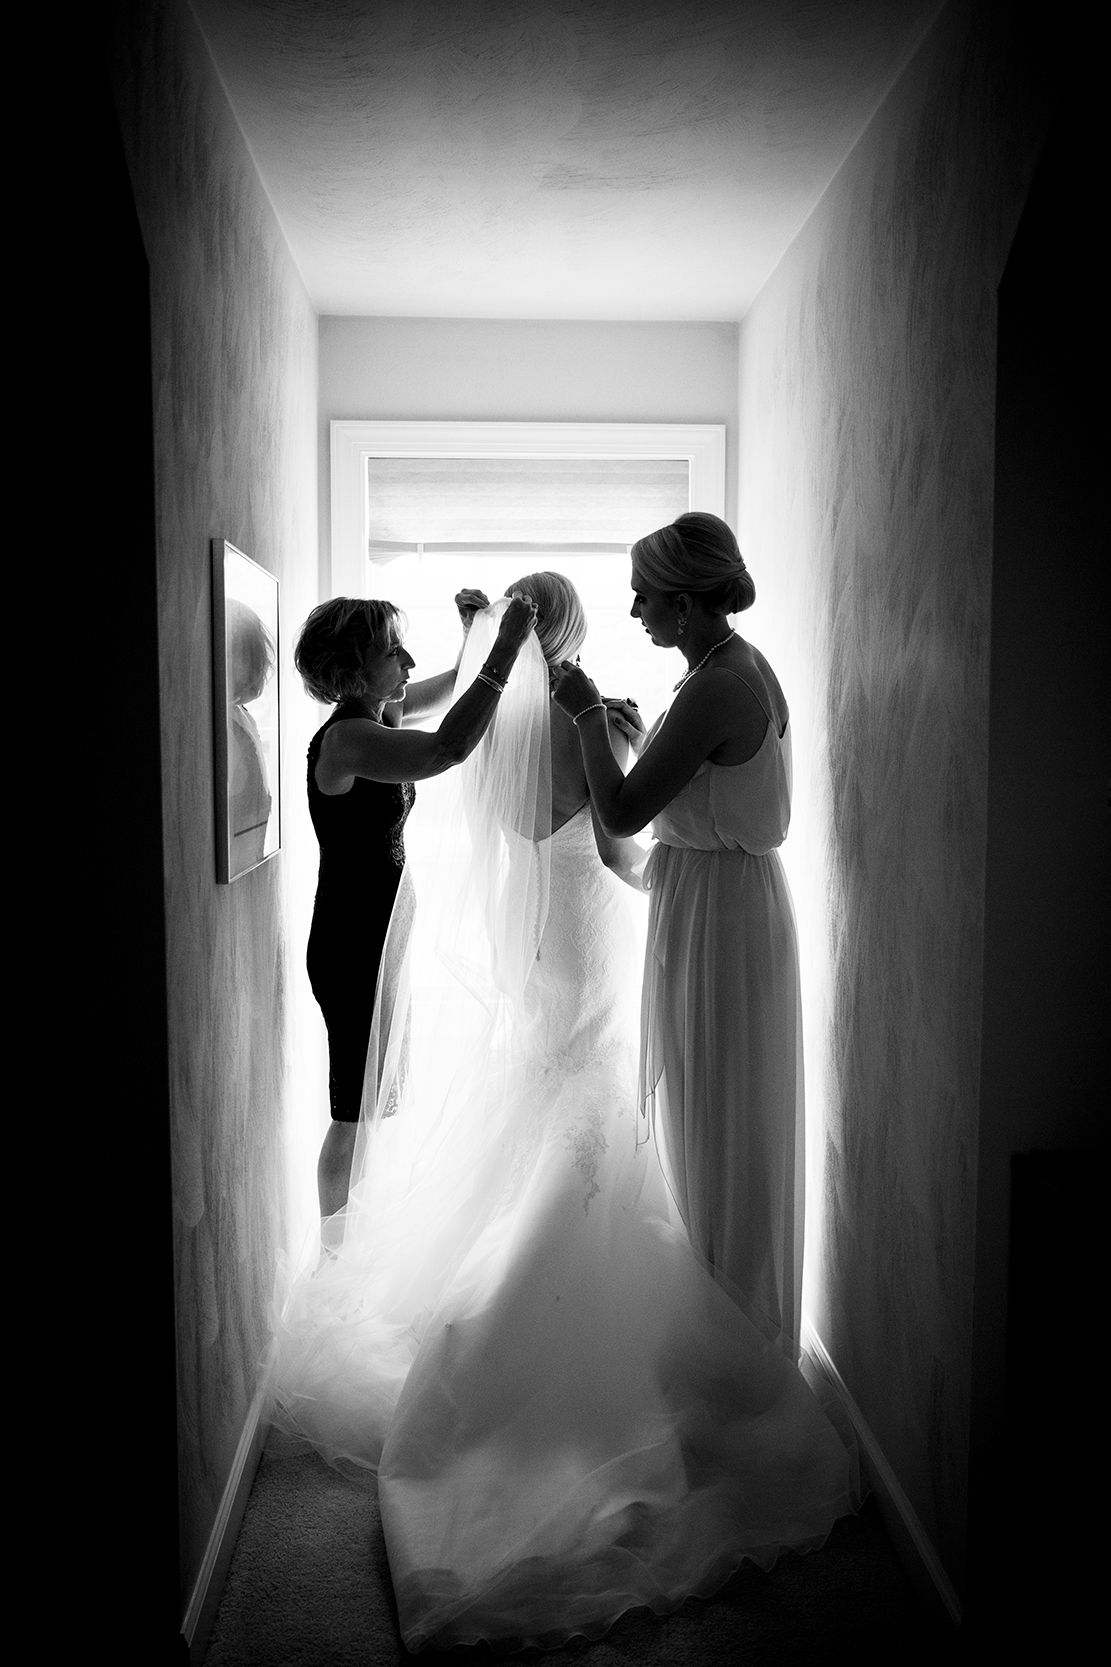 Getting Ready Wedding Day Moment Highlights - Image Property of www.j-dphoto.com